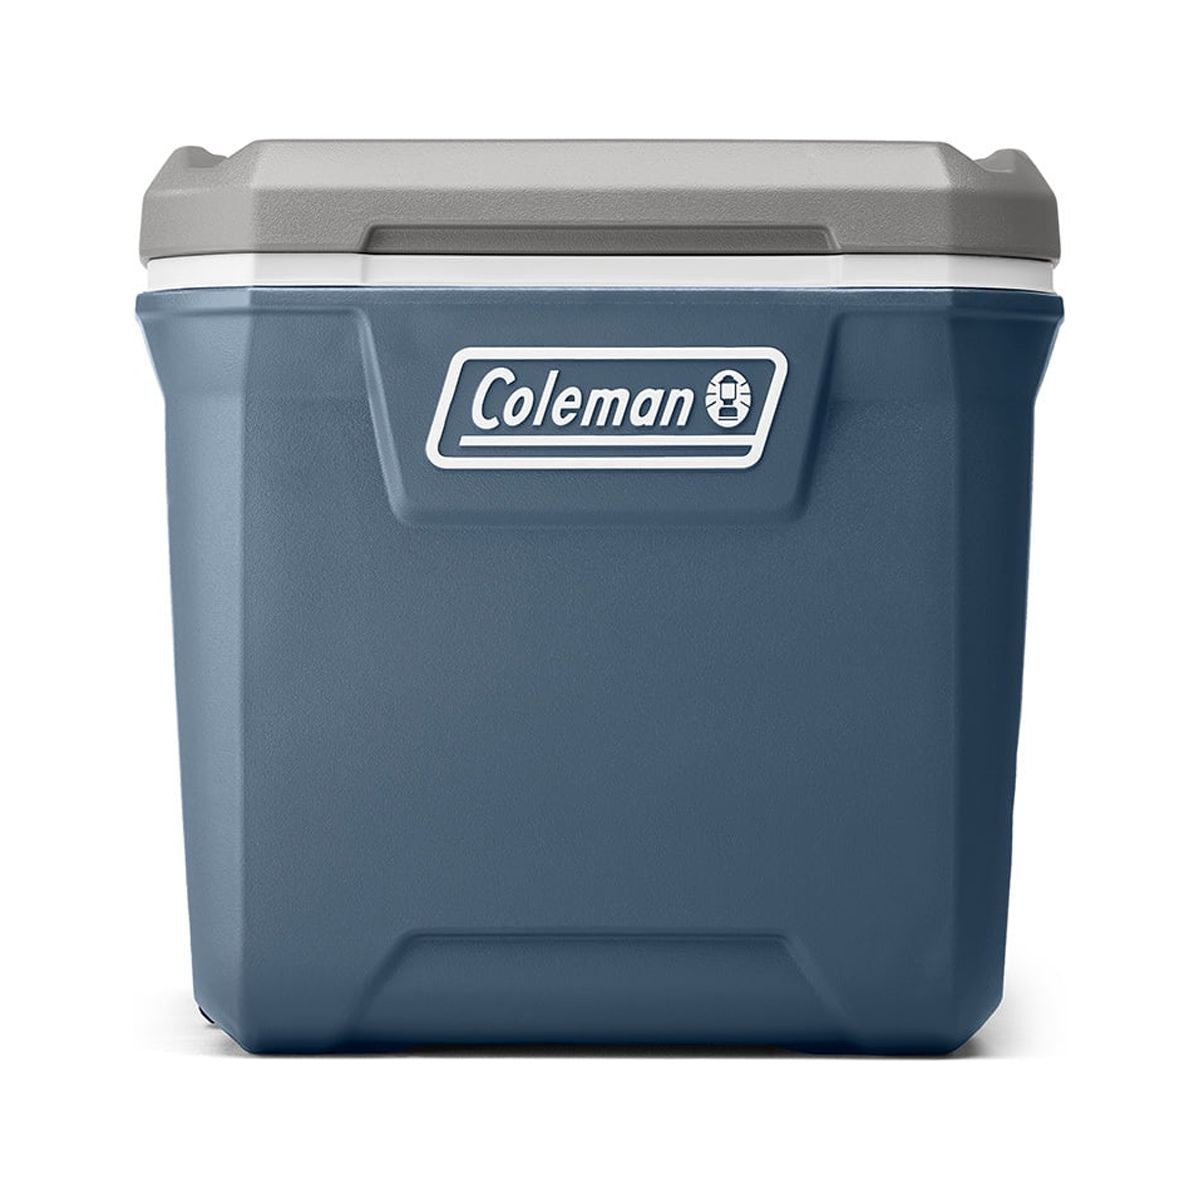 Coleman 316 Series 60QT Hard Chest Wheeled Cooler, Lakeside Blue - image 1 of 11